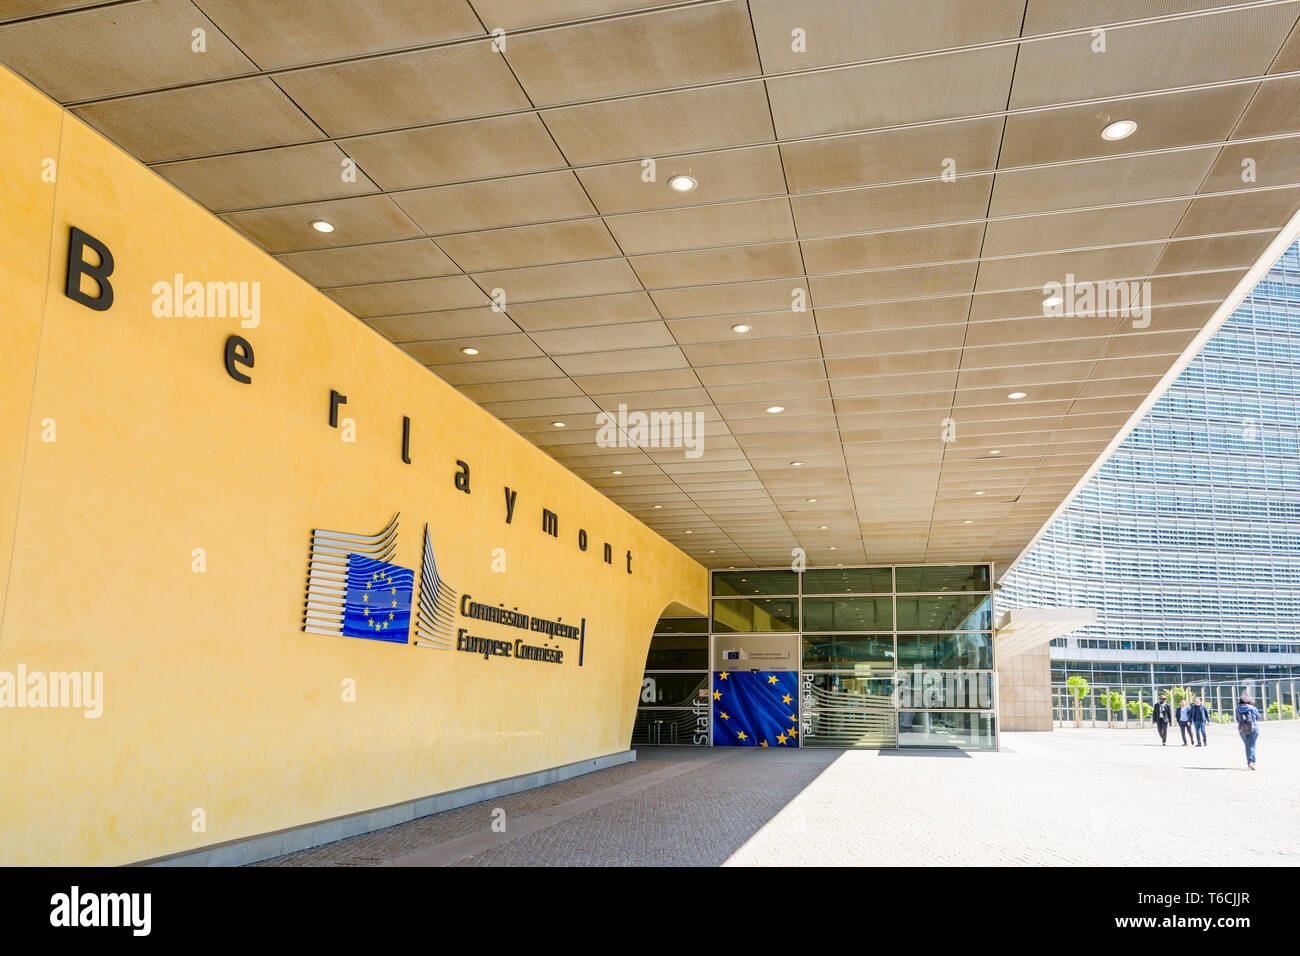 Staff entrance of the Berlaymont building, headquarters of the European Commission in Brussels, Belgium. Stock Photo